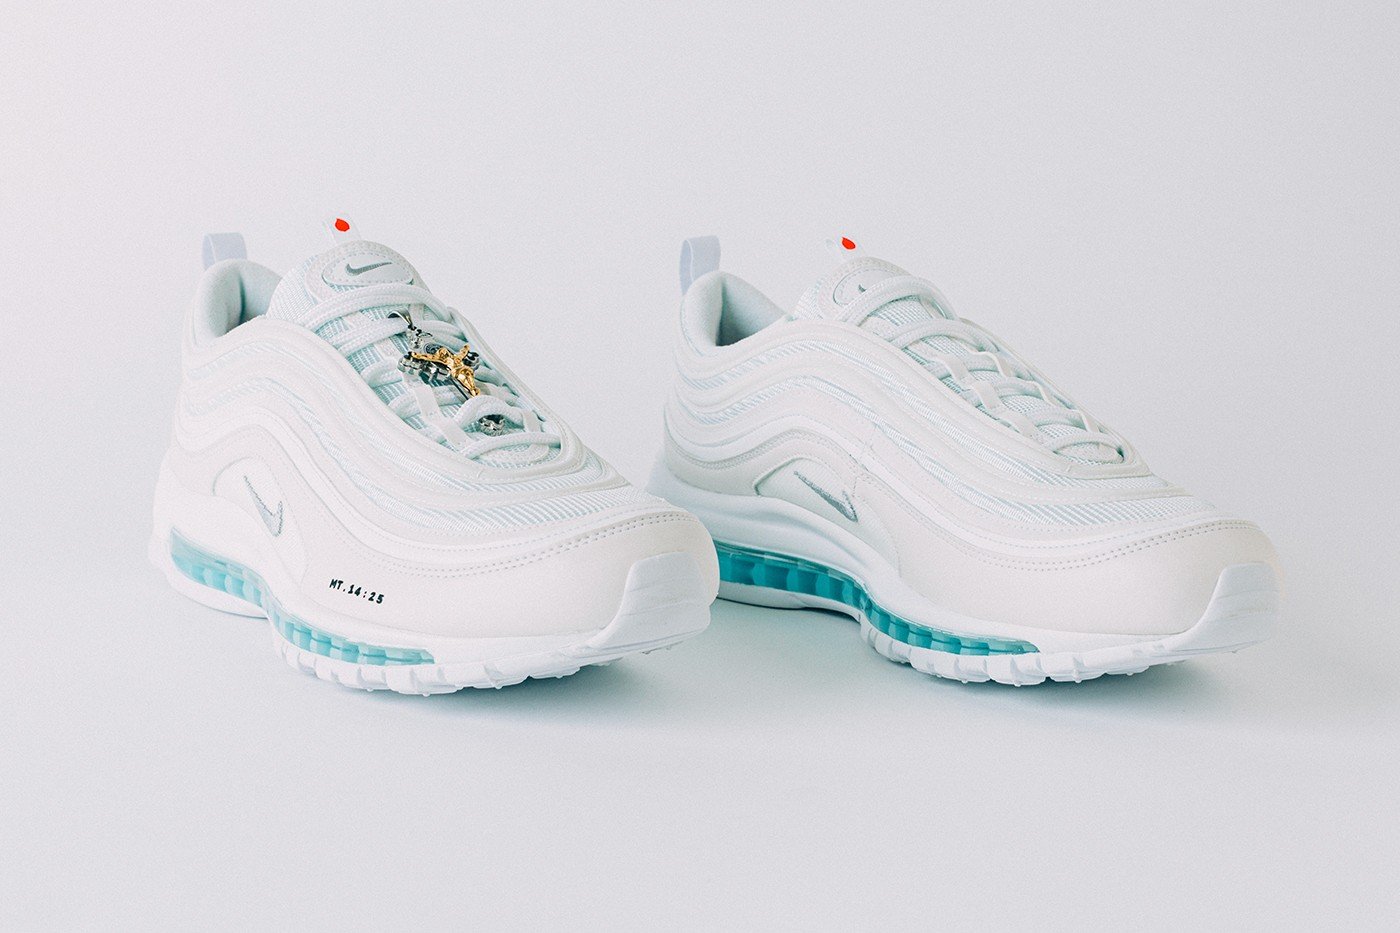 Costing $3,000 these Nike Air Max 97s are injected with holy water - Luxurylaunches